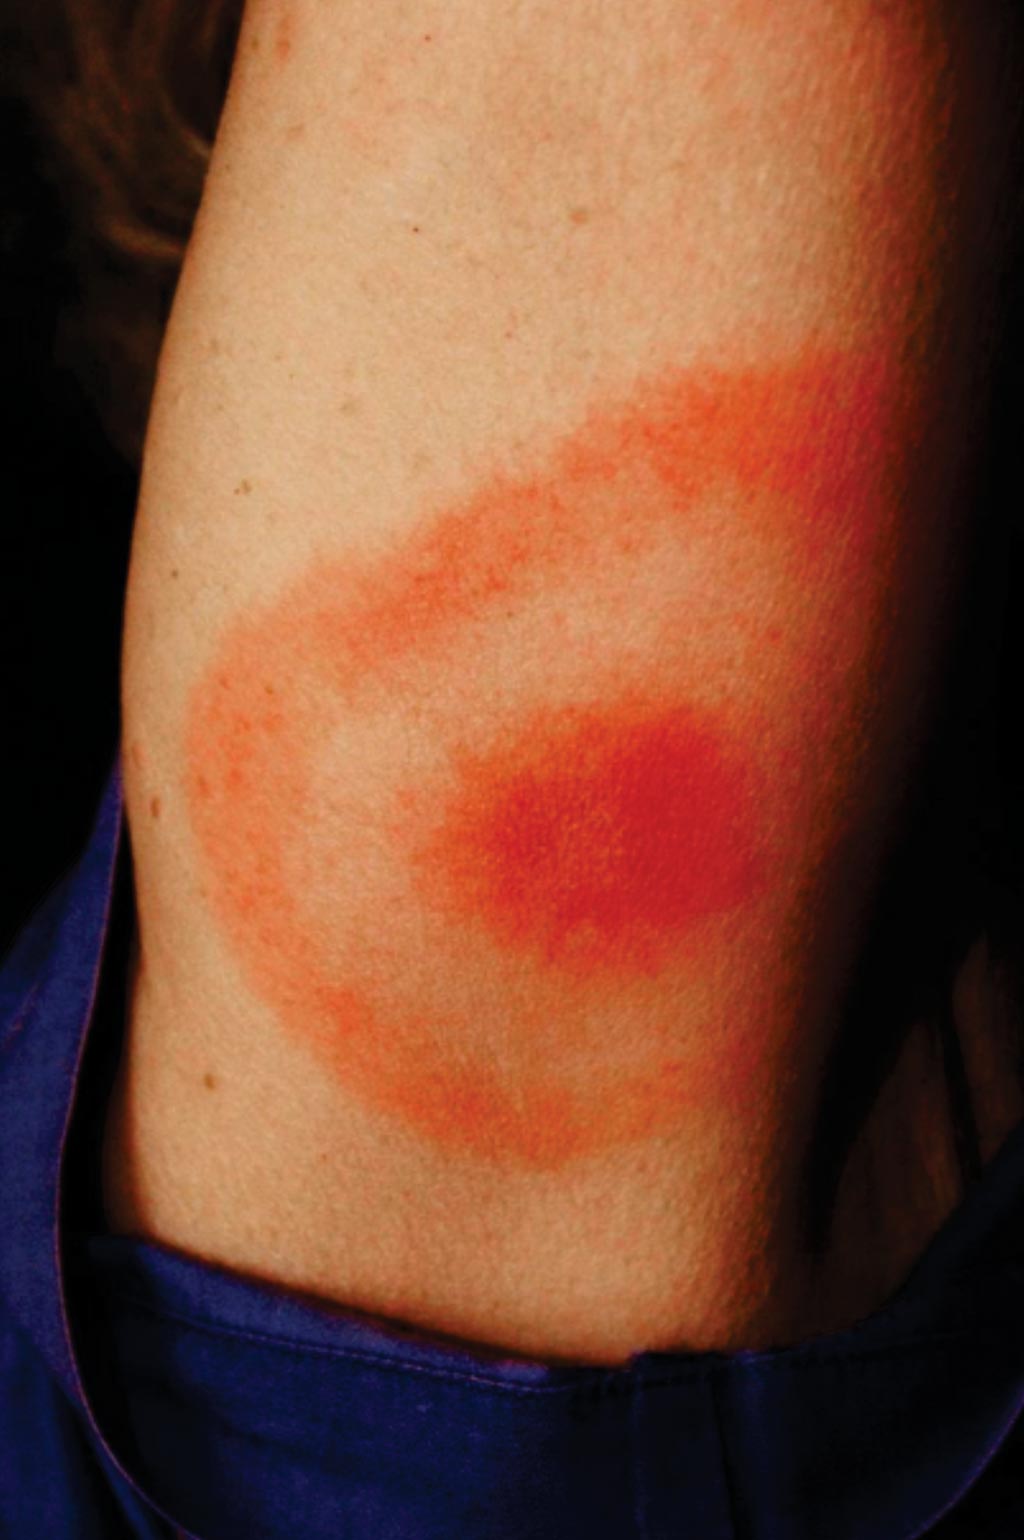 Image: This \"classic\" bullseye rash is also called erythema migrans. A rash caused by Lyme disease does not always look like this and approximately 25% of those infected with Lyme disease may have no rash, hence the need for new diagnostic tests (Photo courtesy of James Gathany/CDC).